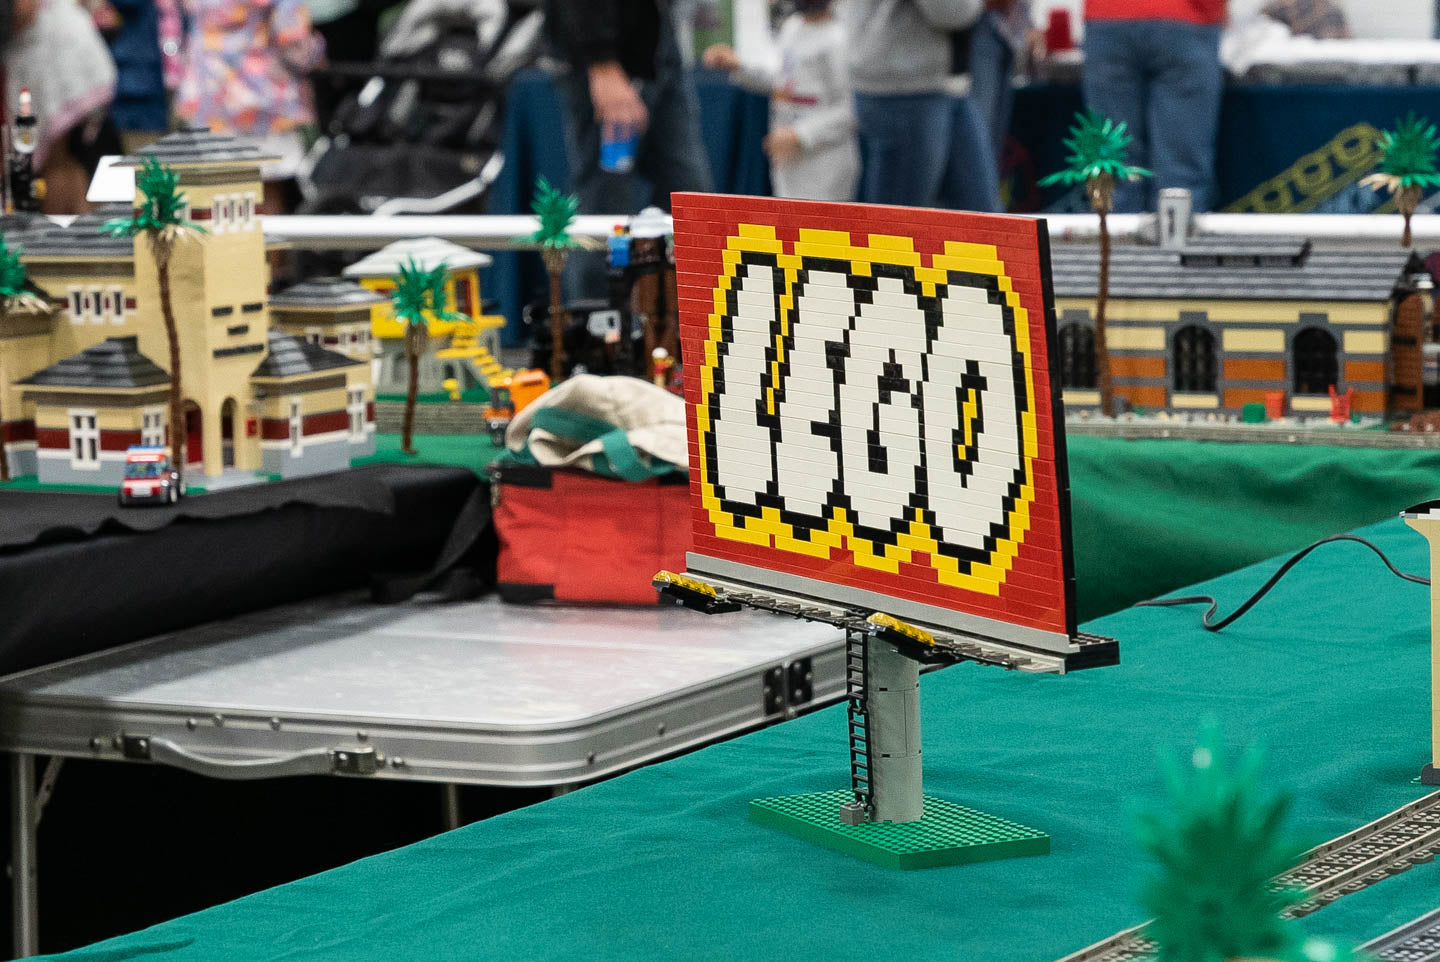 Our Trip to Brickworld Indiana 2021 (All the Pictures)